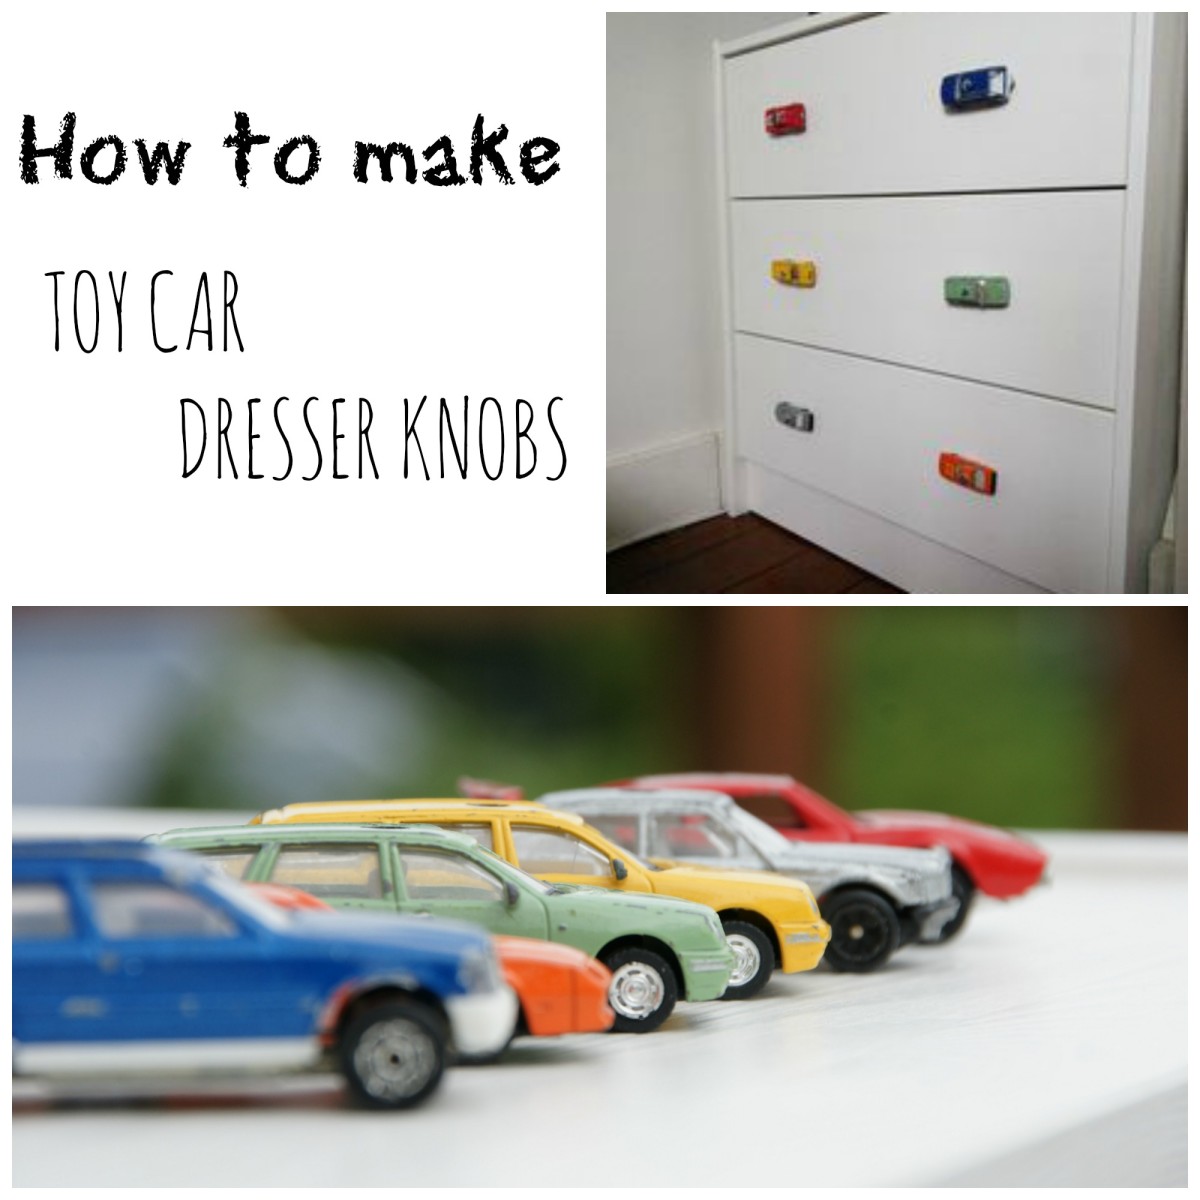 Replacing Boring Dresser Knobs With Toy Cars